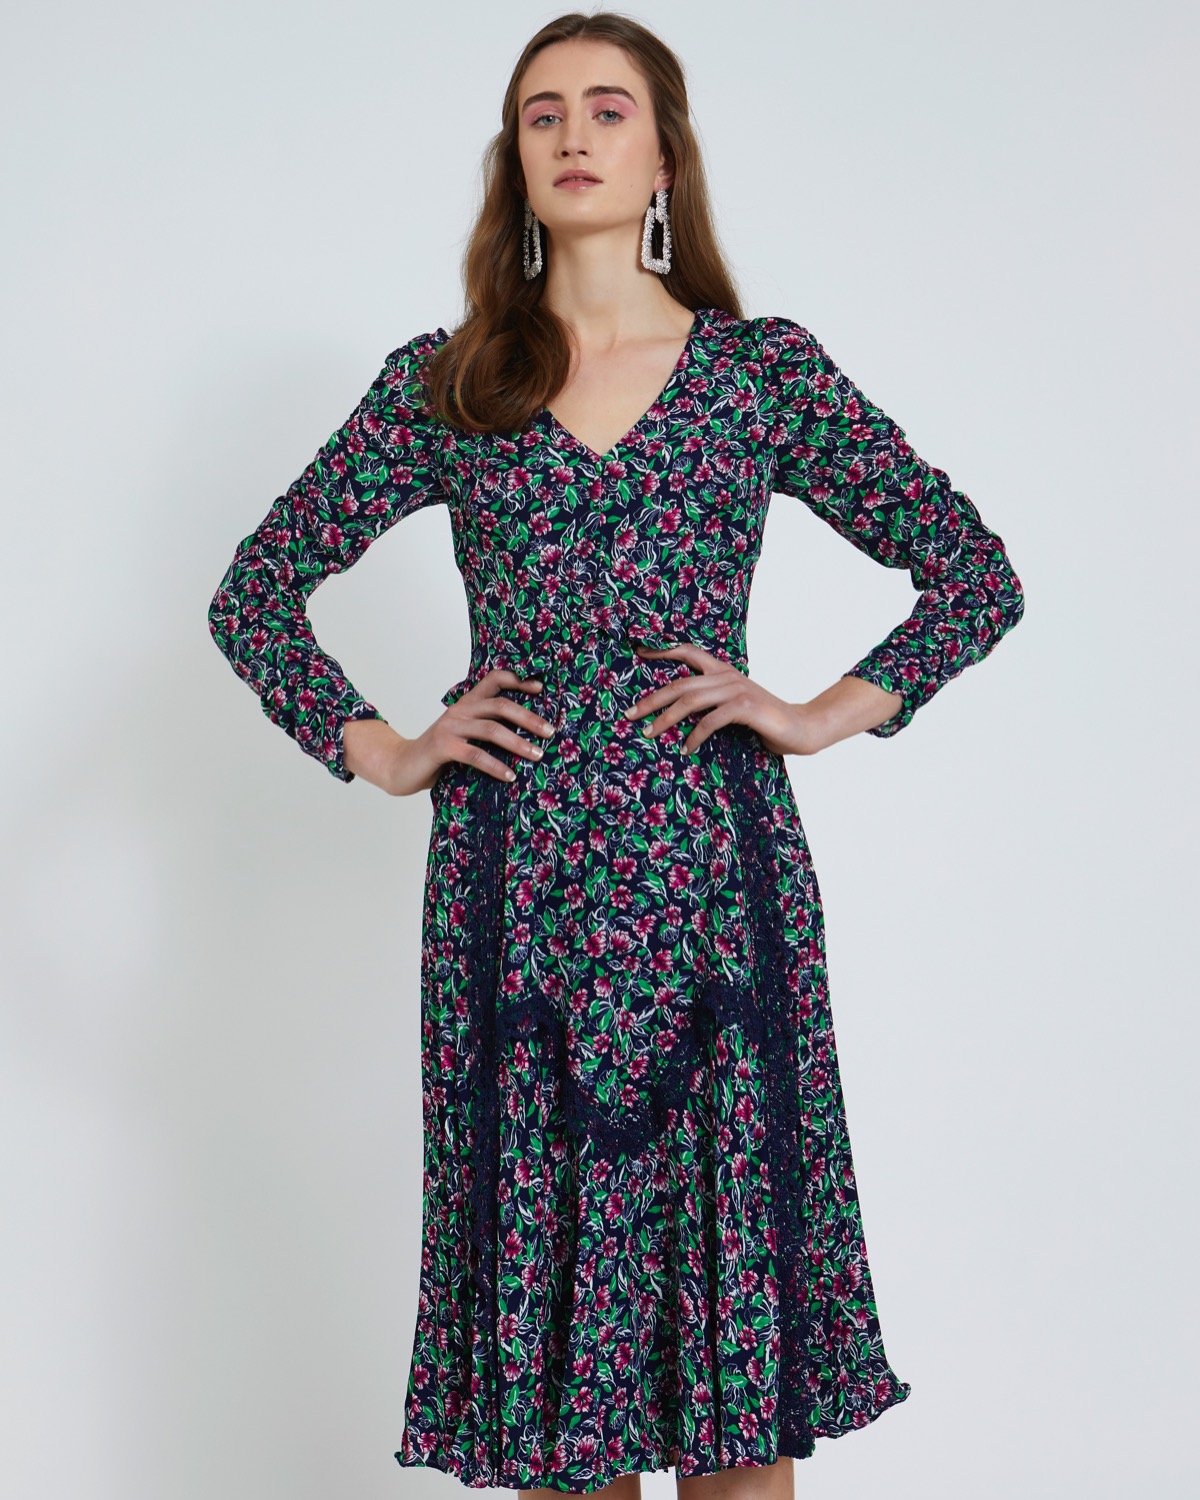 Buy > dunnes stores maxi dresses > in stock